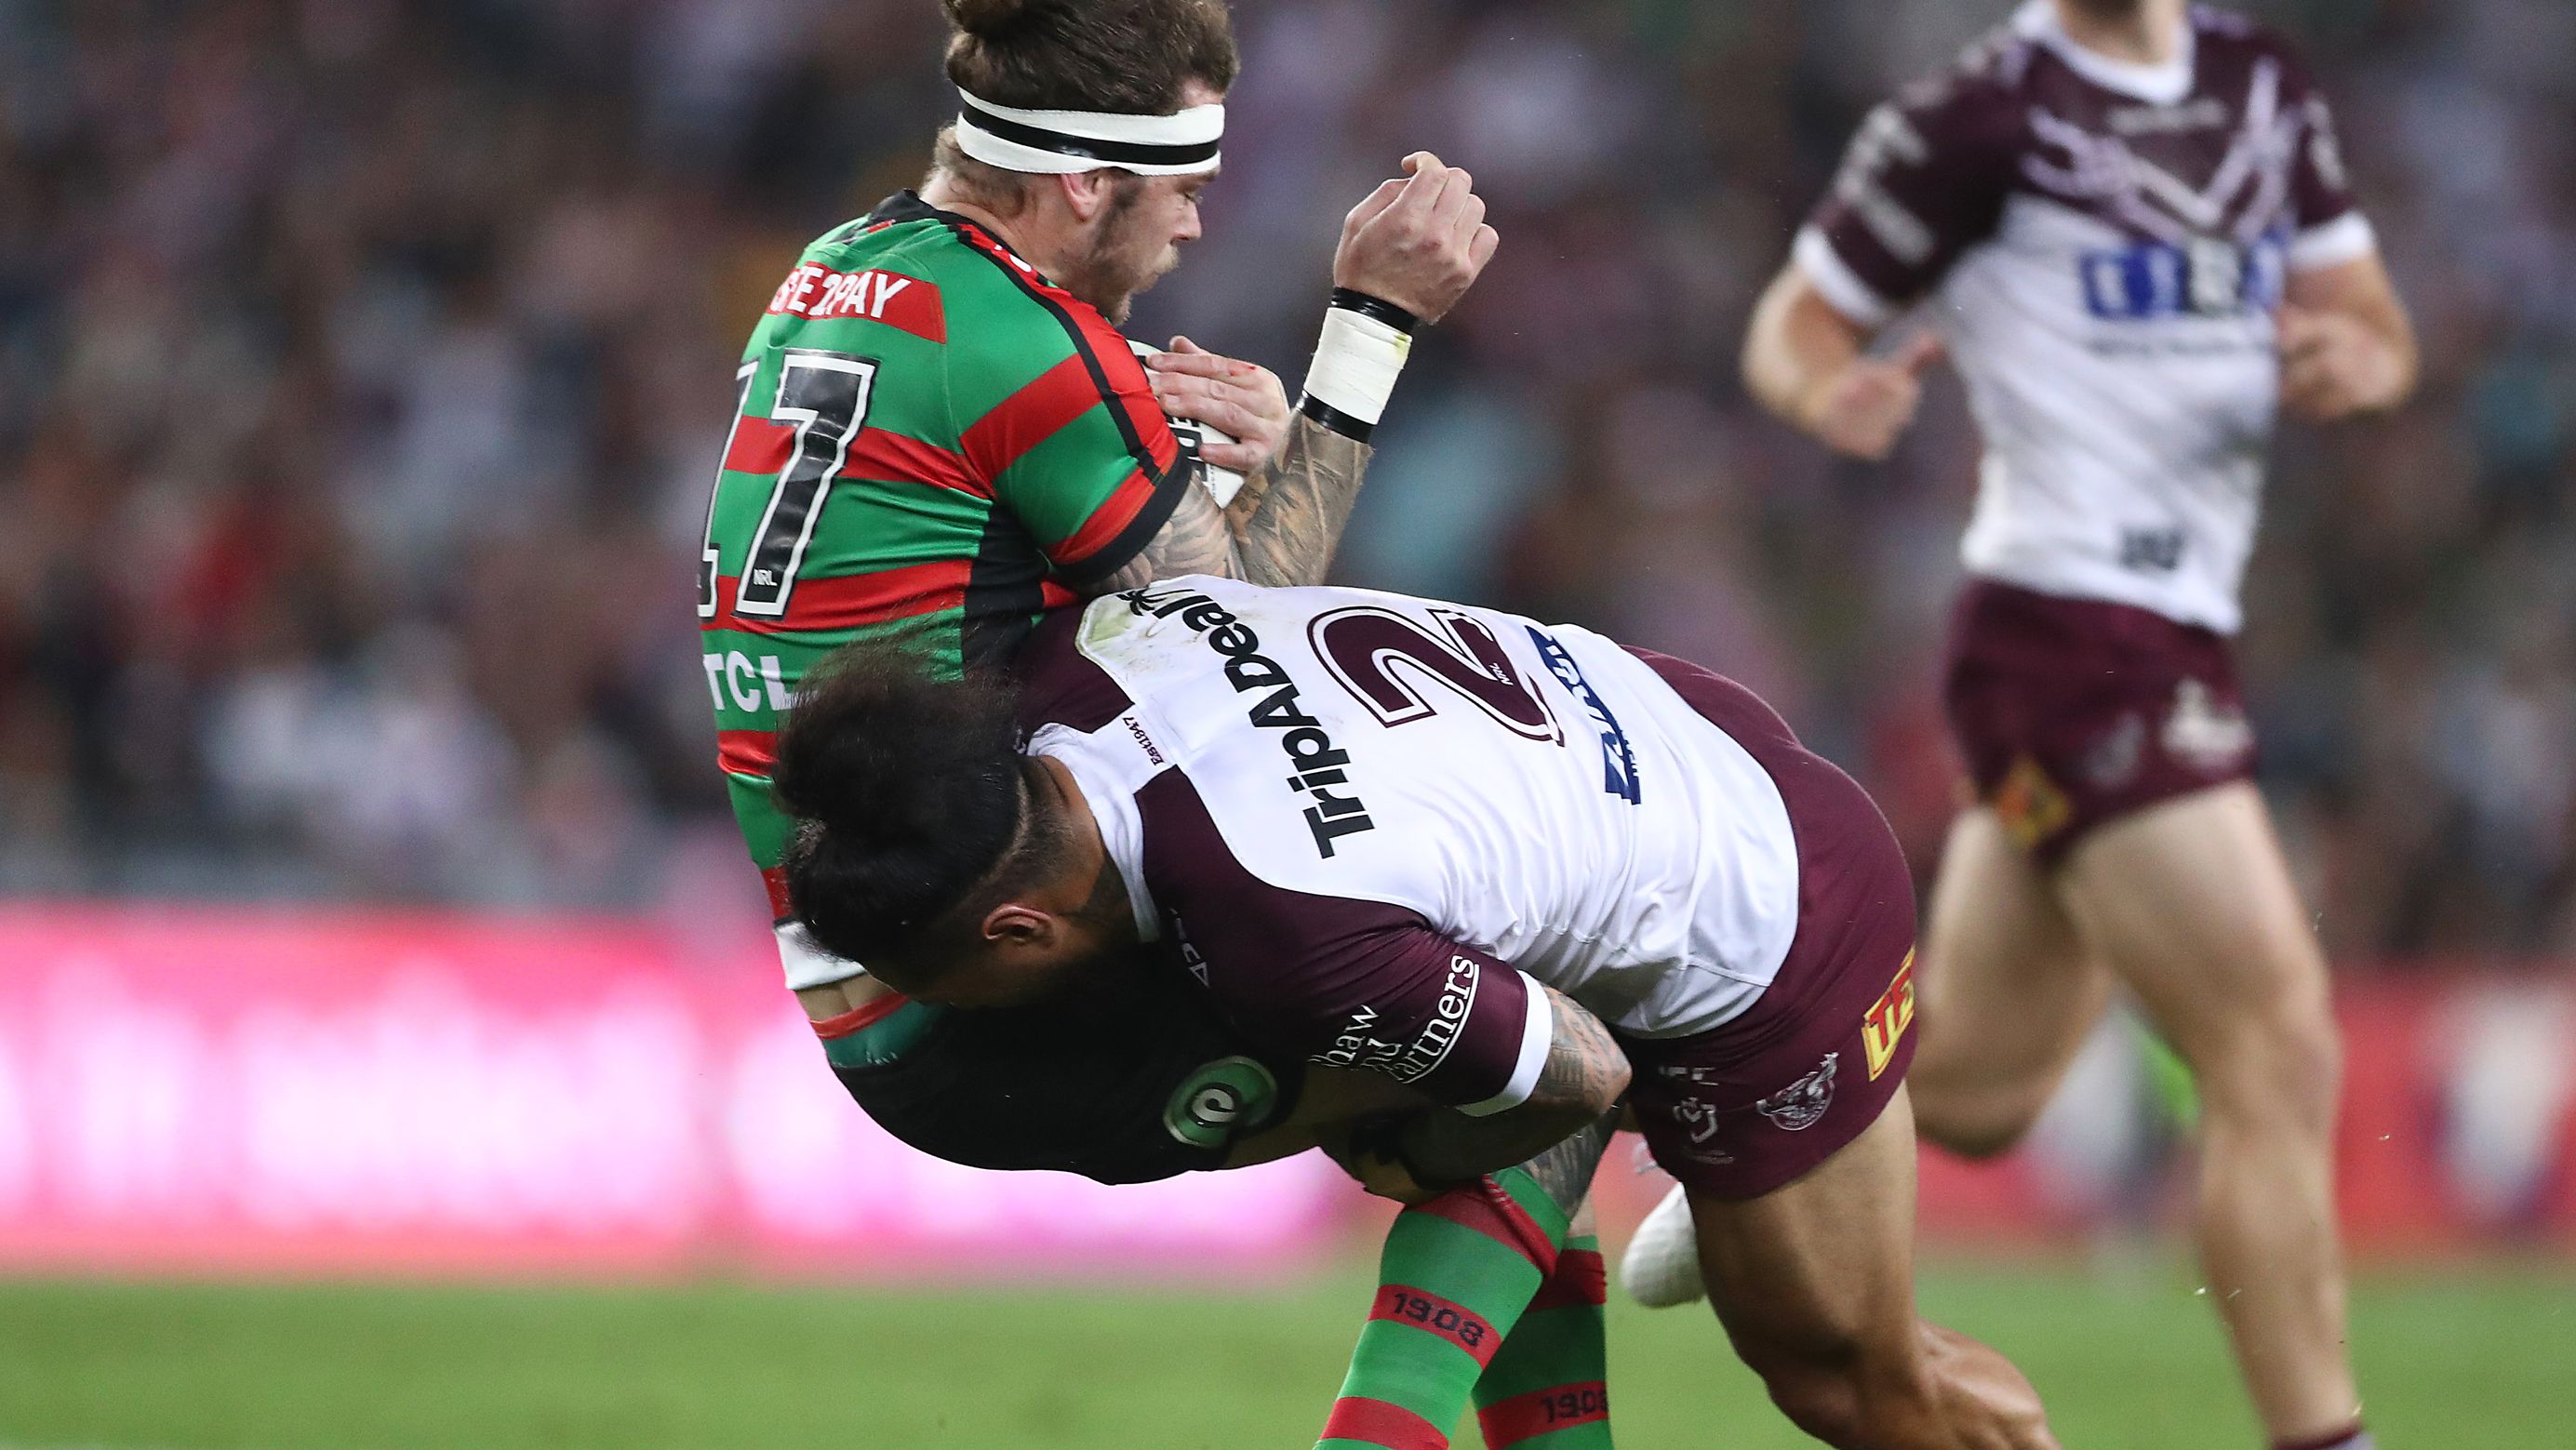 Jorge Taufua of the Sea Eagles tackles Ethan Lowe of the Rabbitohs.